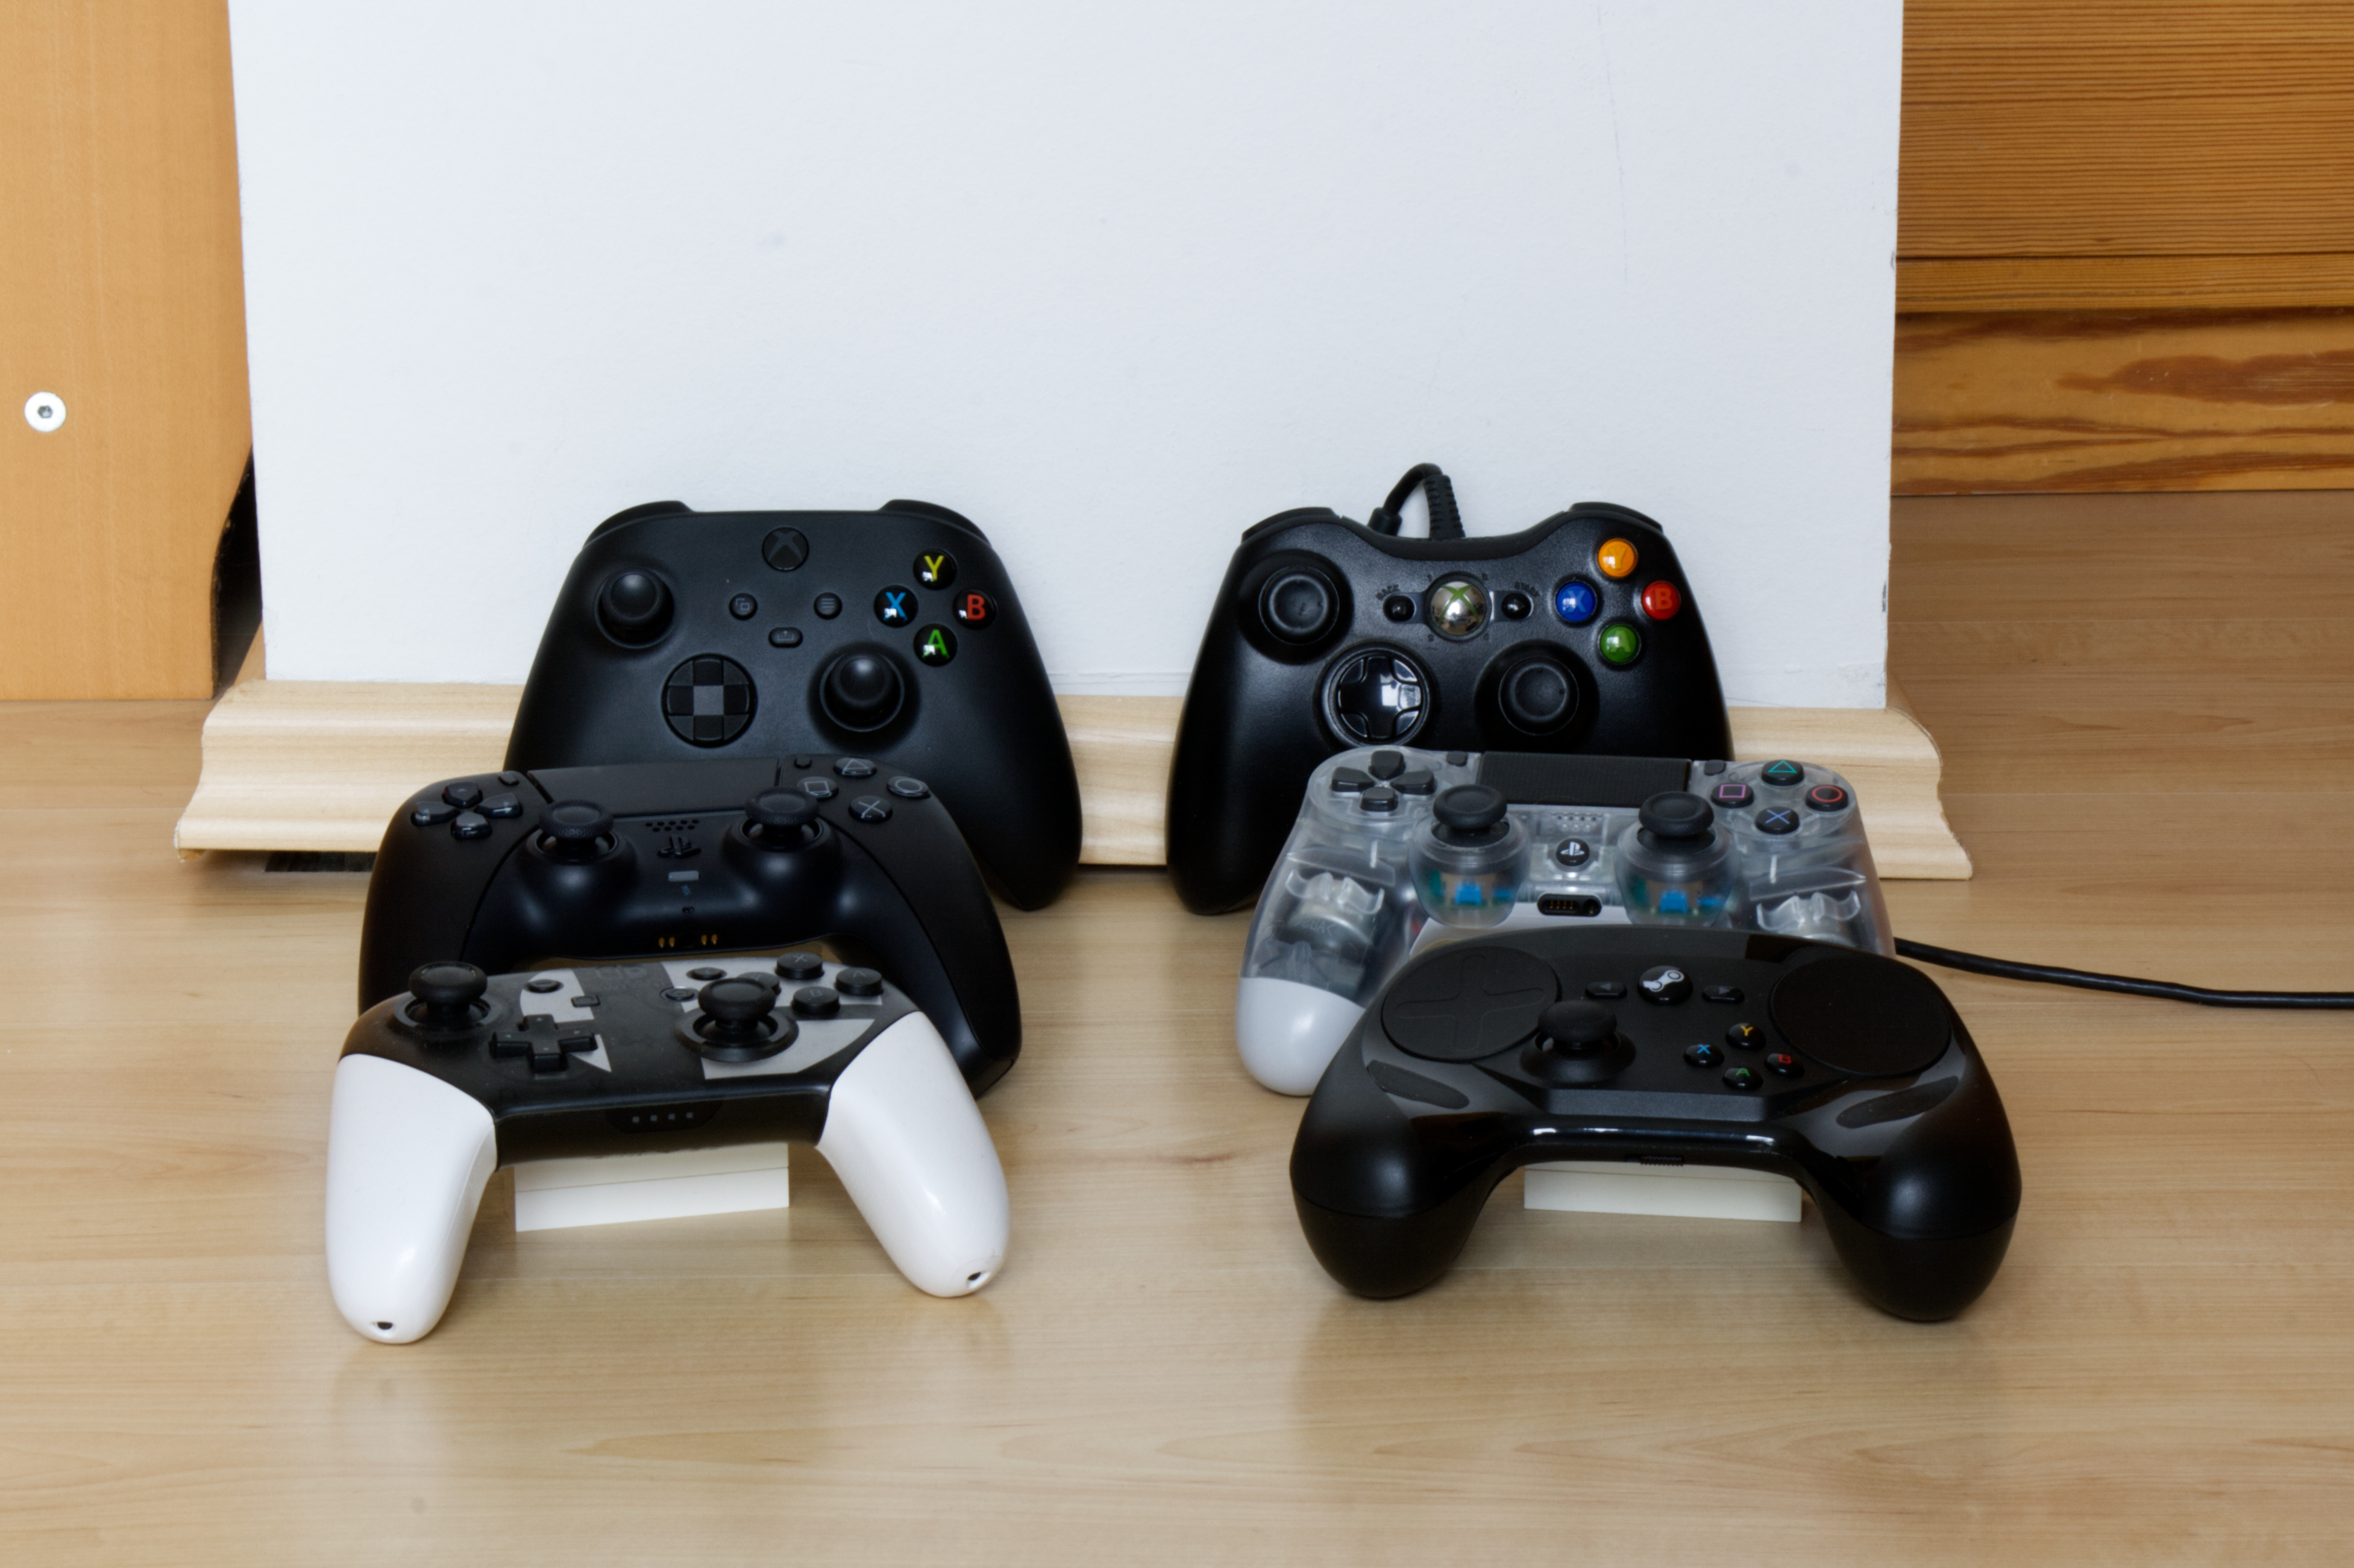 **Figure 5:** All controllers in this image have been tested. In the first row are a Switch Pro Controller and the Valve Controller of the Steam Link, in the second row a DualSense and a Dualshock for the Playstation 5 and 4 and in the last row are an X Box One Controller and an X Box 360 Controller.